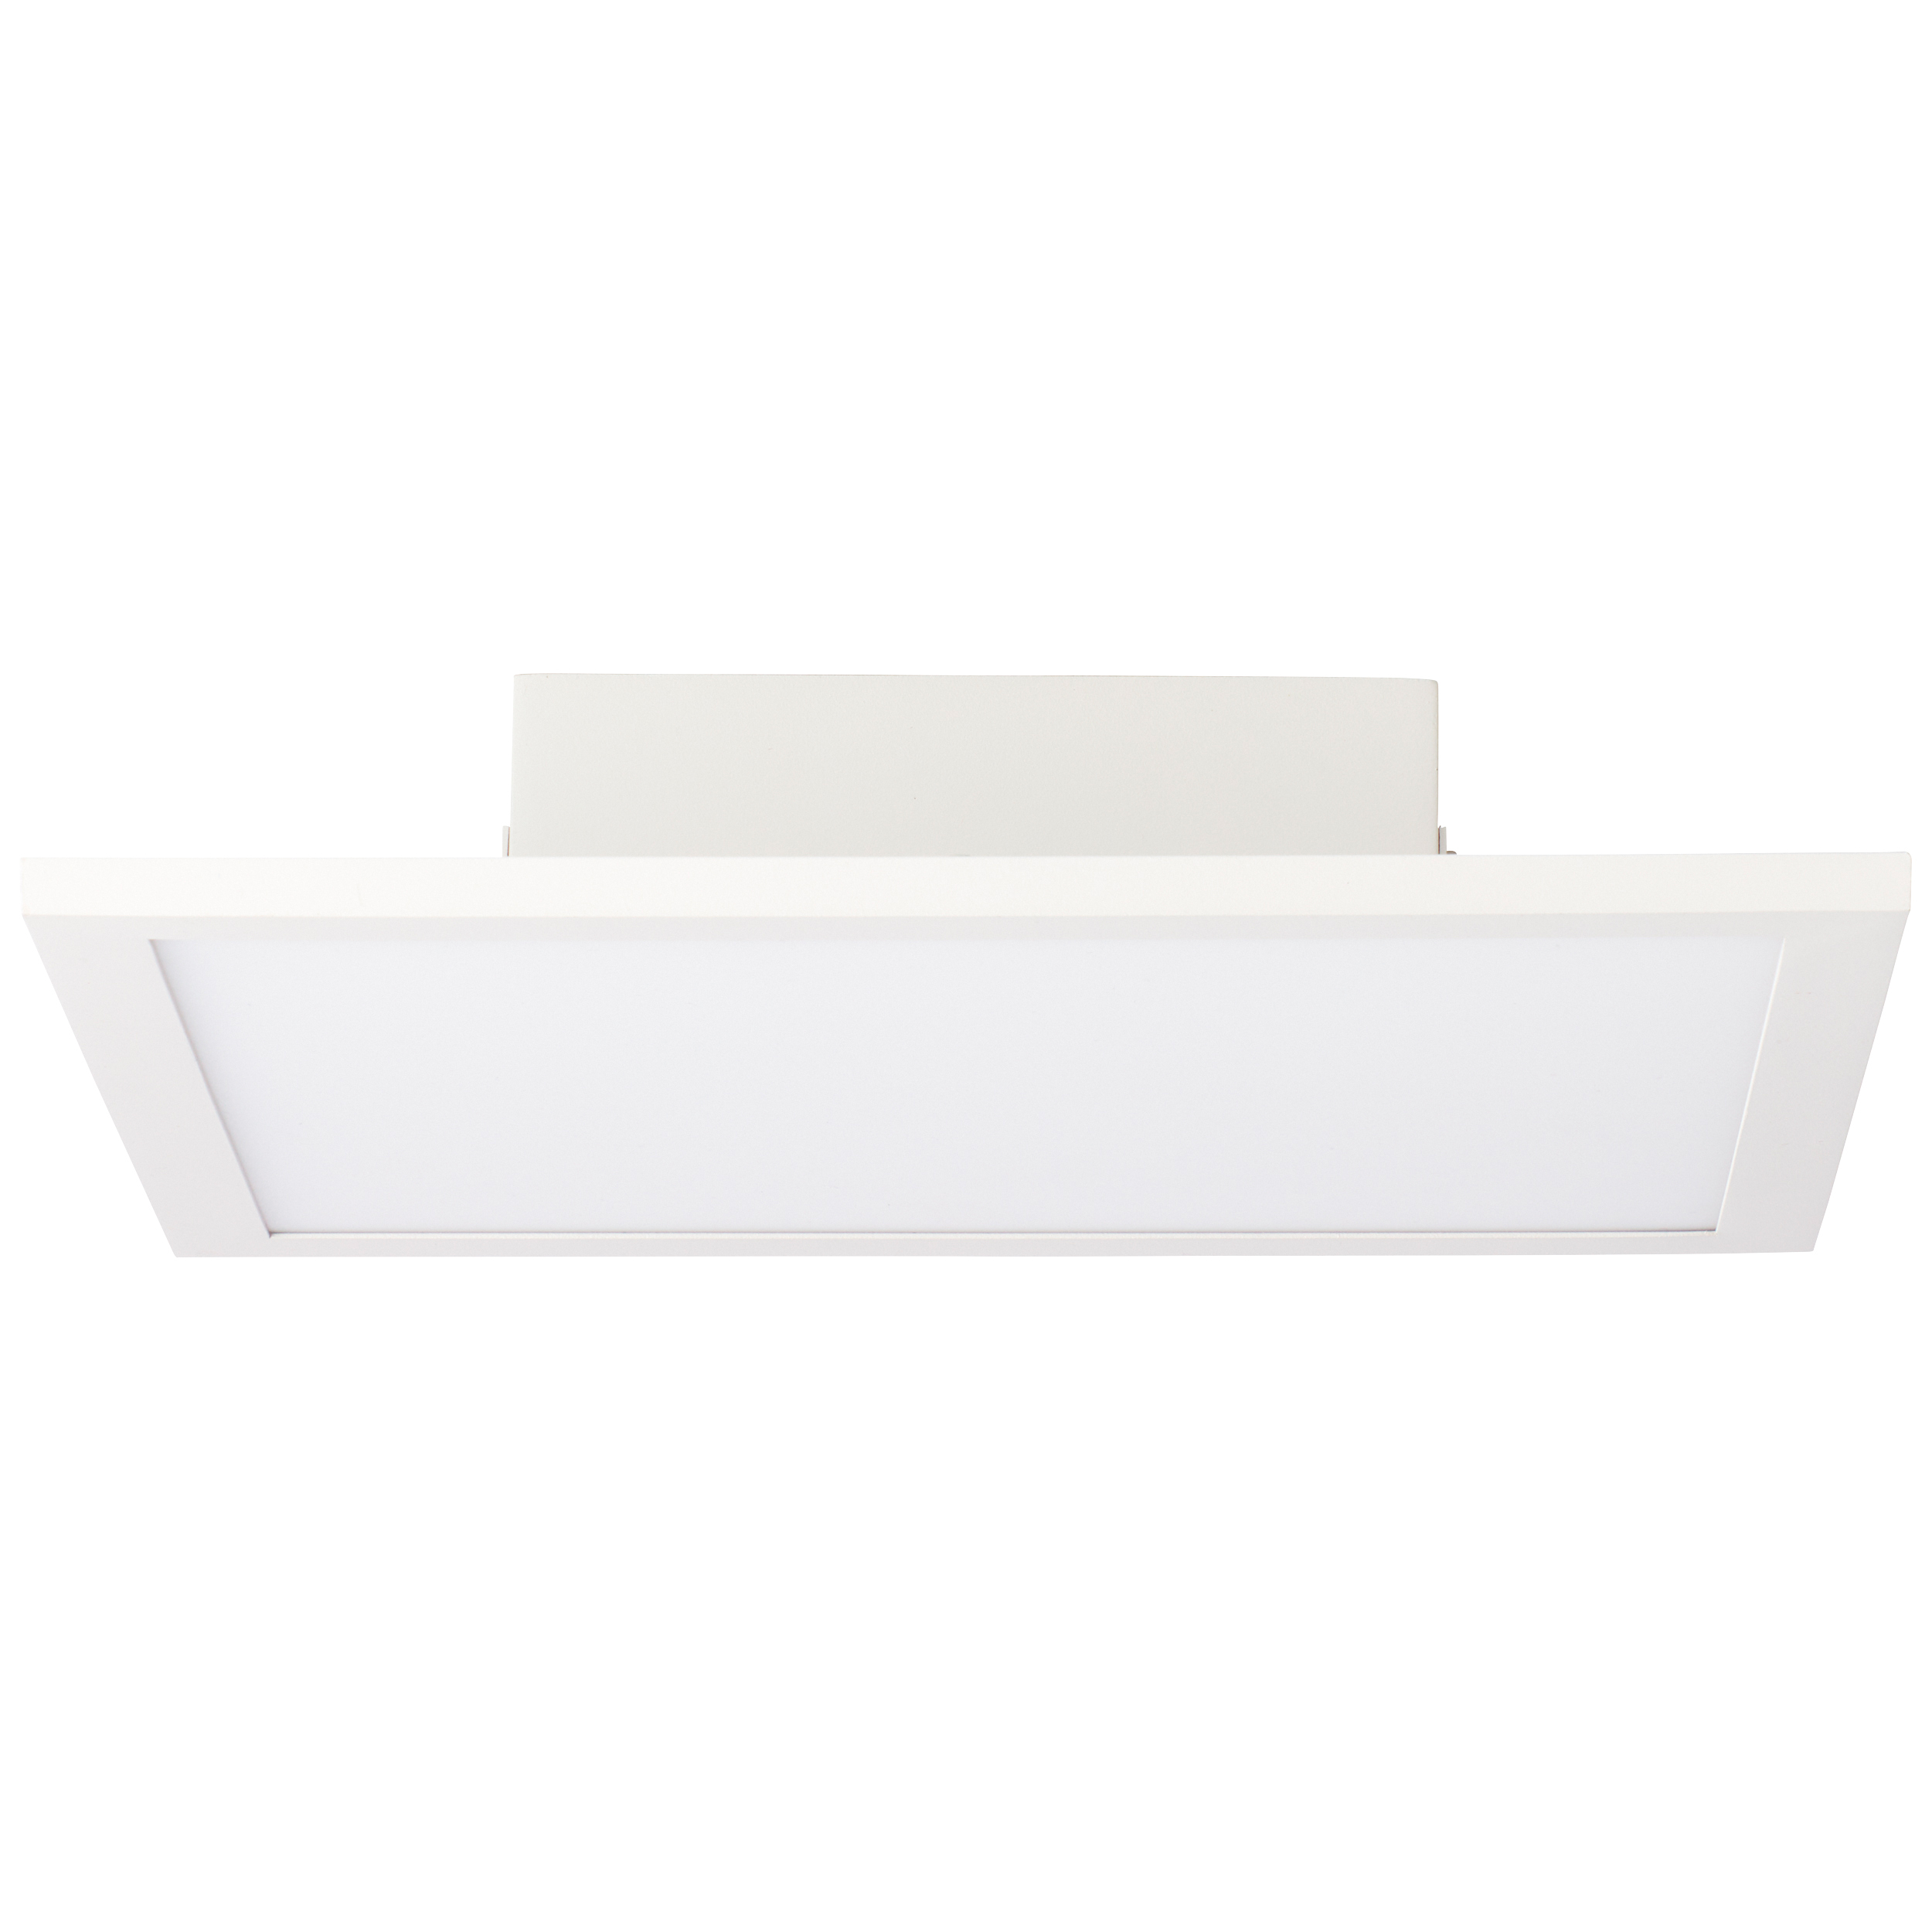 Buffi ceiling | panel 30x30cm white G90355A85 surface-mounted LED white/cold